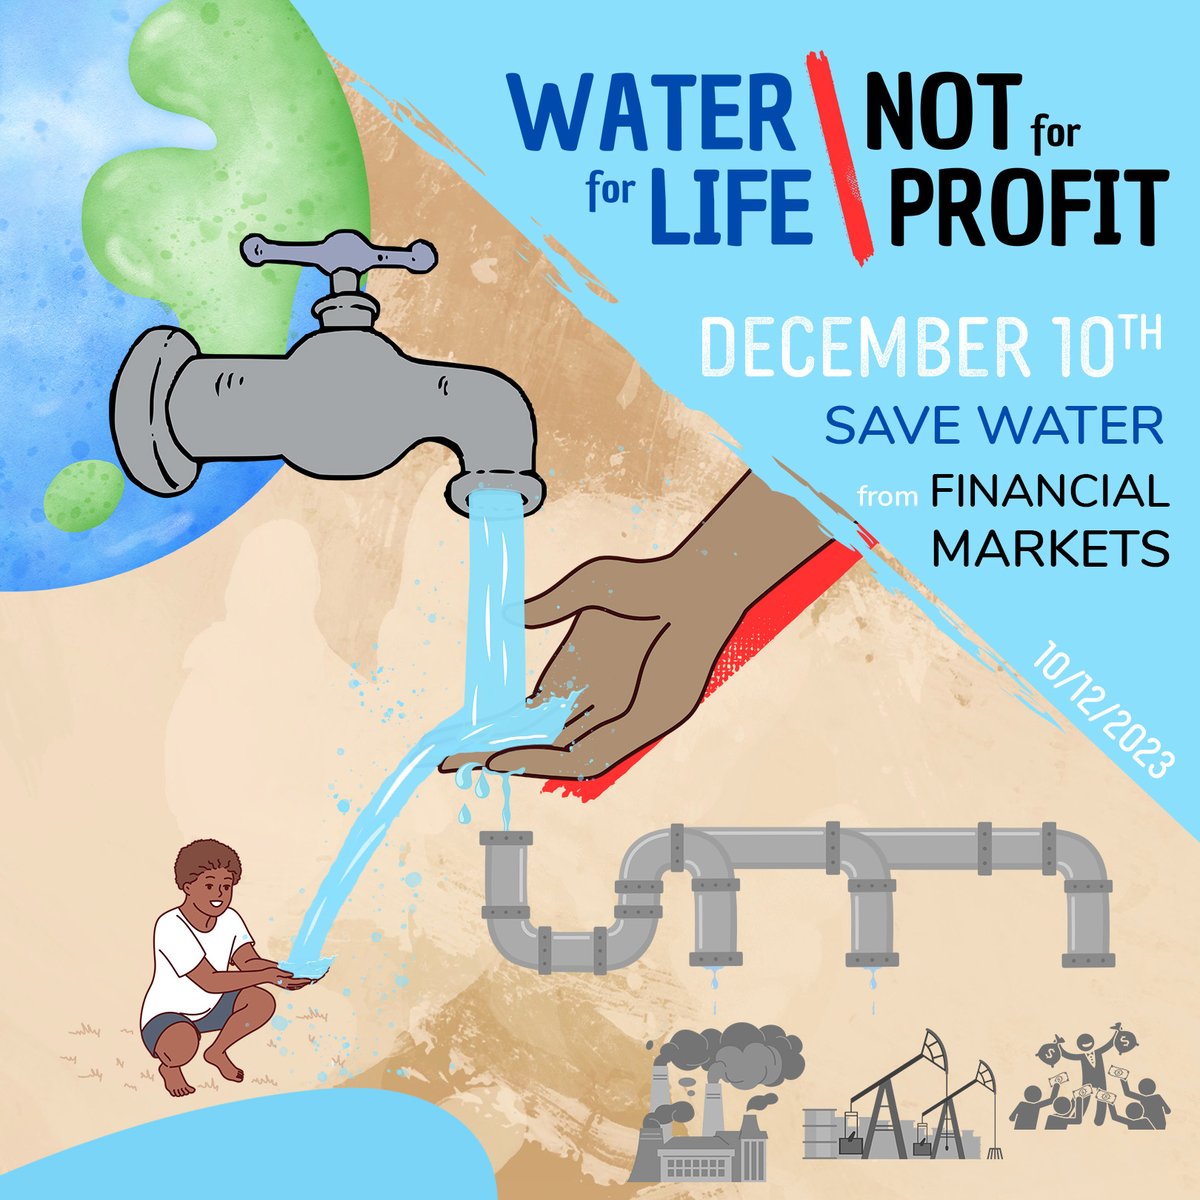 #WaterForLifeNotForProfit | As world leaders discuss climate change’s severe impacts on water at the #COP28, water activists and advocates declare a DAY OF ACTION December 10th to protect water from financial & corporate interests.

eausecours.org/waterforlifeno…

#WaterHumanRight